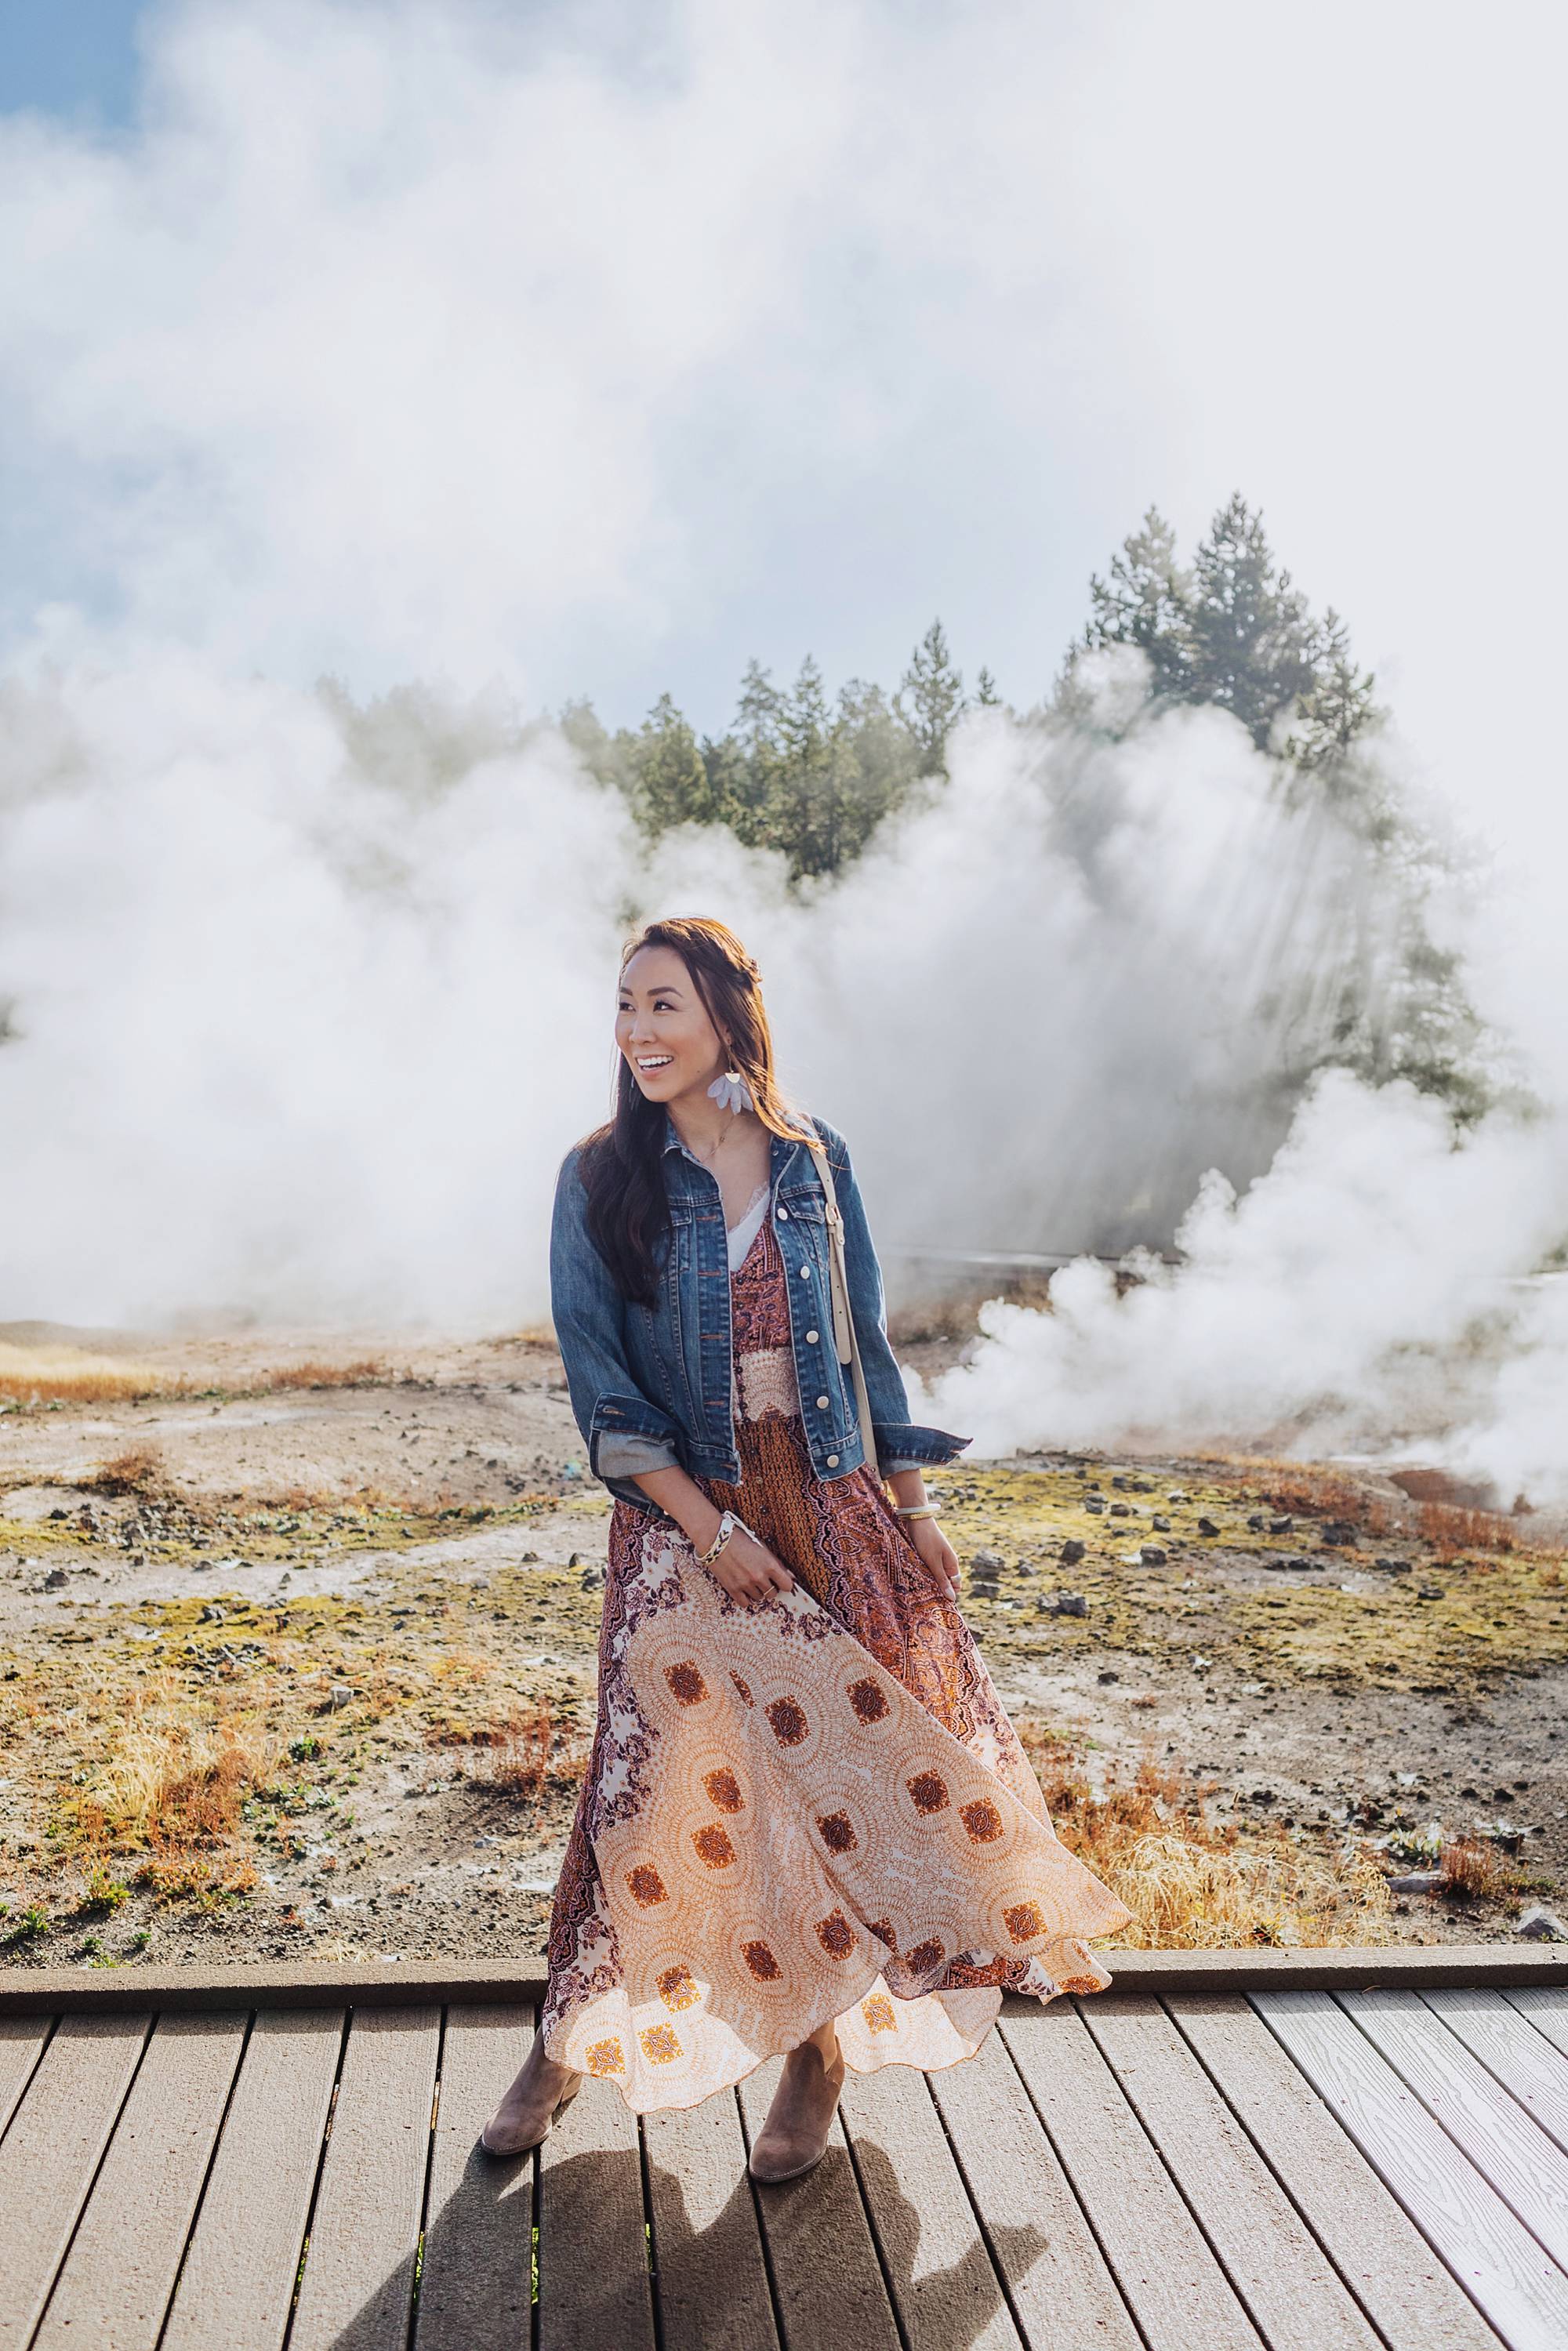 Yellowstone geysers, lifestyle blogger Diana Elizabeth in free people dress from Macy's and lucky brand booties wearing denim jacket. travel fashion inspiration post